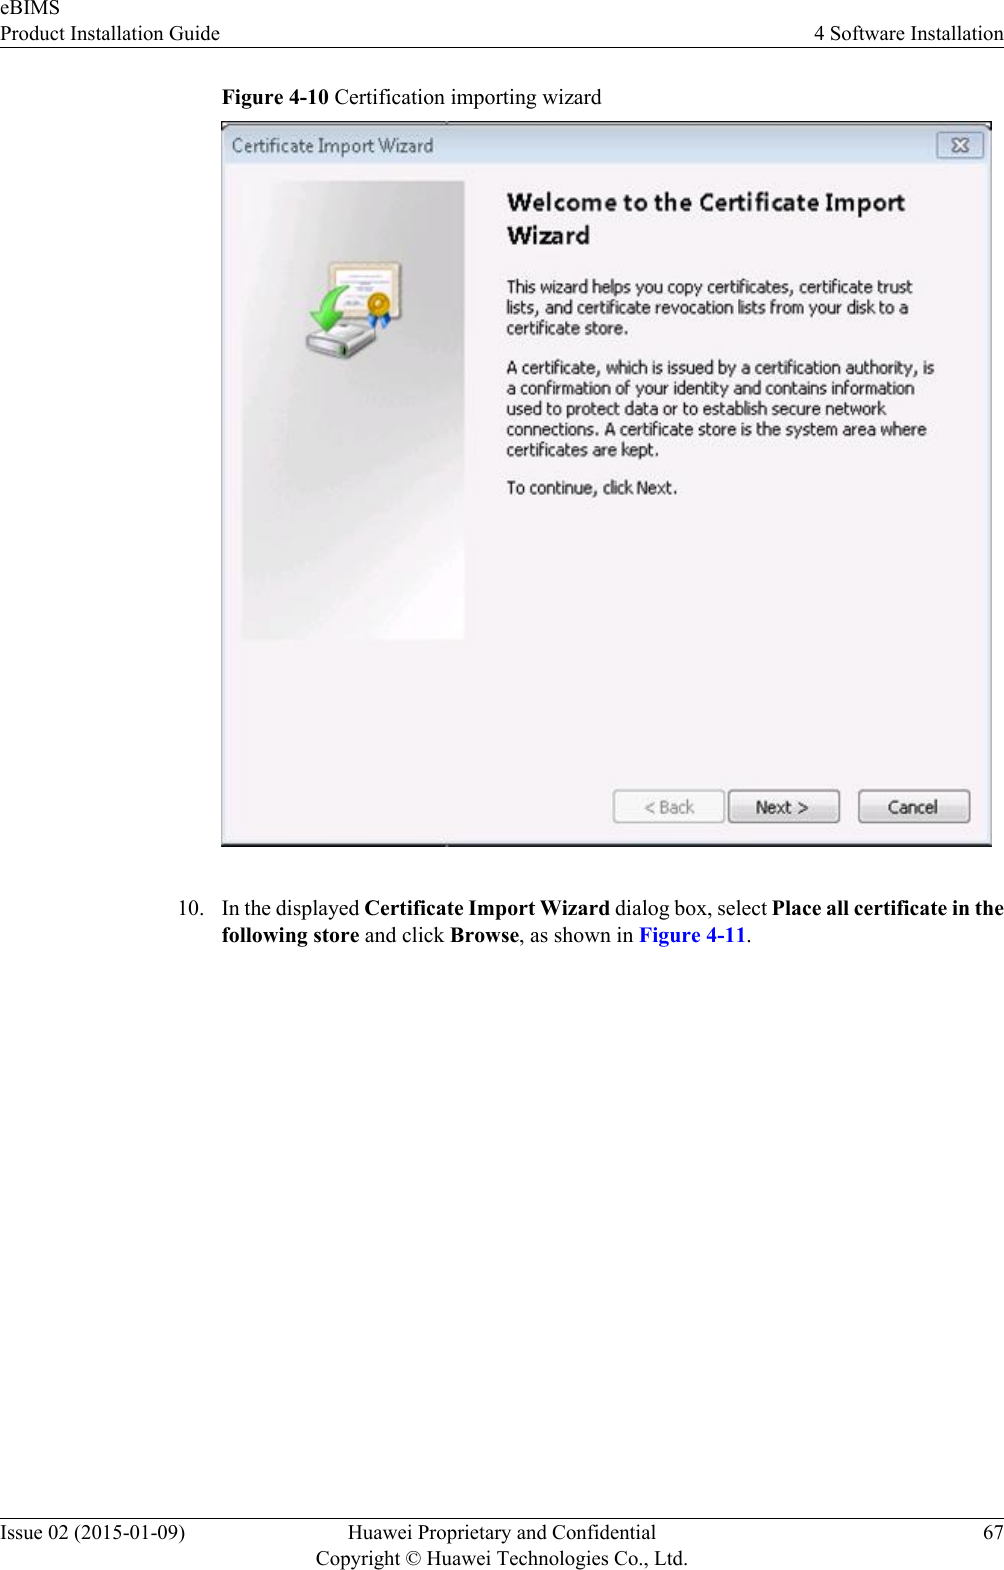 Figure 4-10 Certification importing wizard10. In the displayed Certificate Import Wizard dialog box, select Place all certificate in thefollowing store and click Browse, as shown in Figure 4-11.eBIMSProduct Installation Guide 4 Software InstallationIssue 02 (2015-01-09) Huawei Proprietary and ConfidentialCopyright © Huawei Technologies Co., Ltd.67